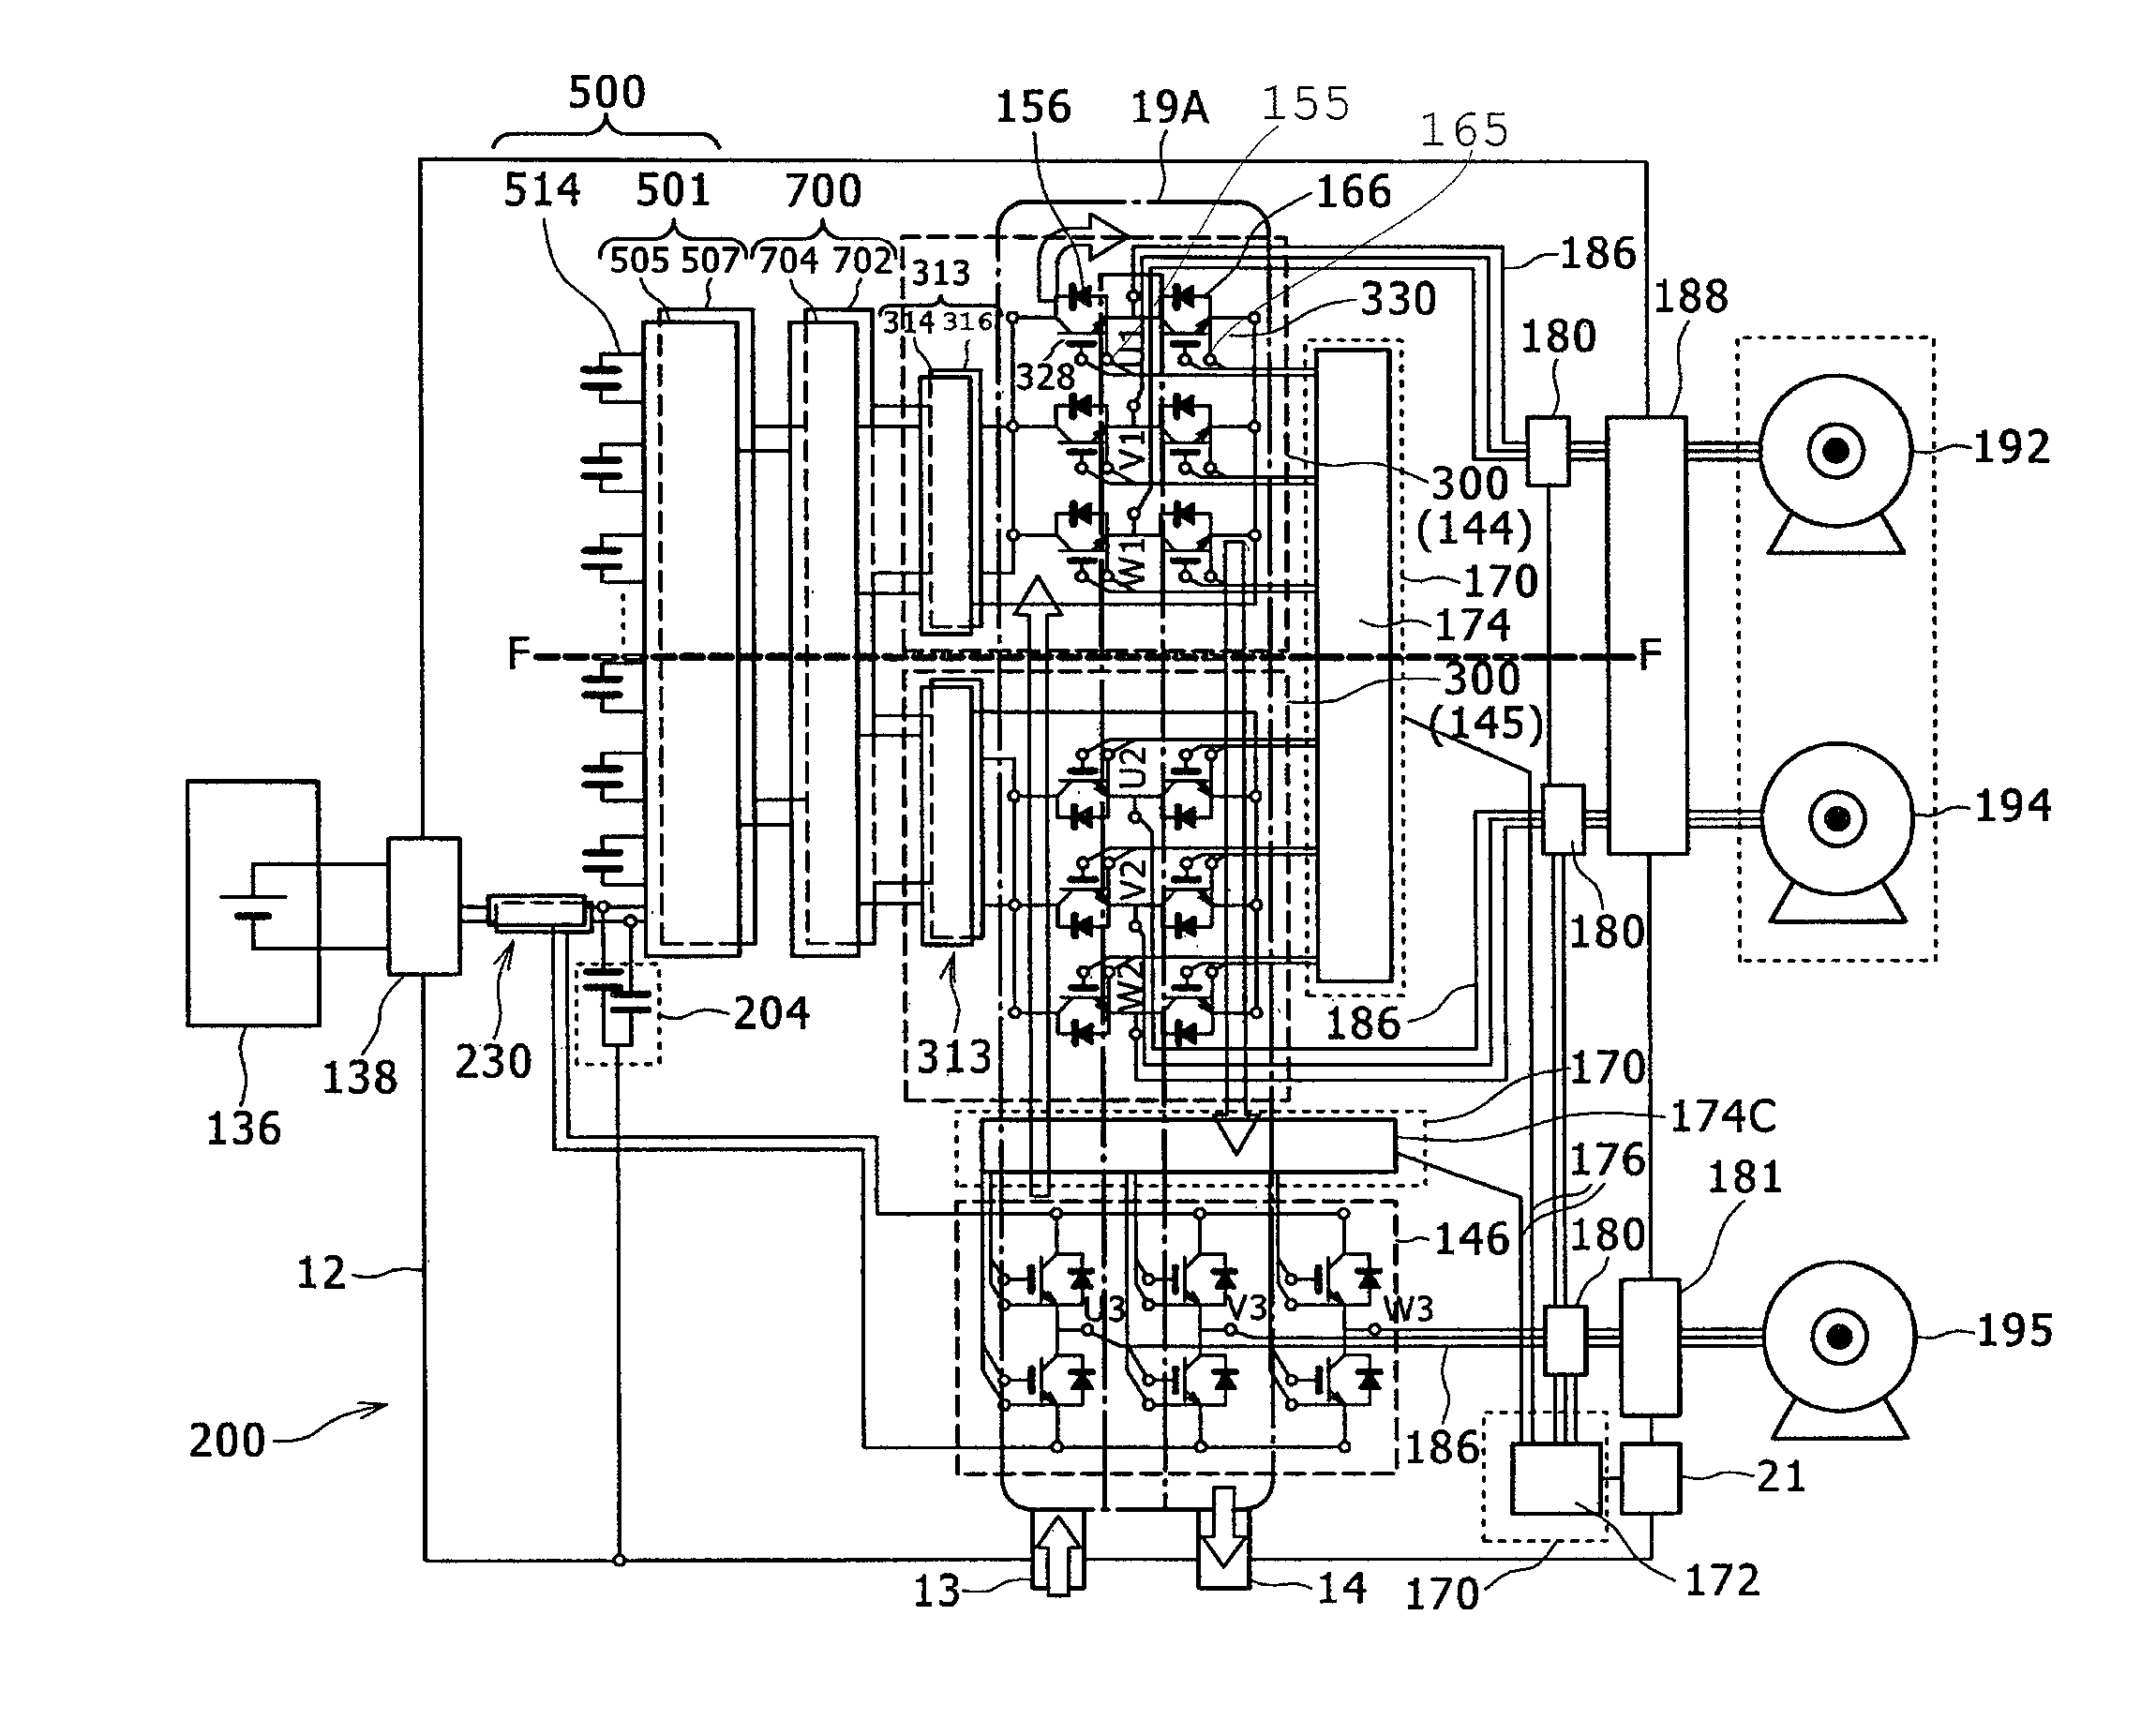 Power conversion apparatus and electric vehicle